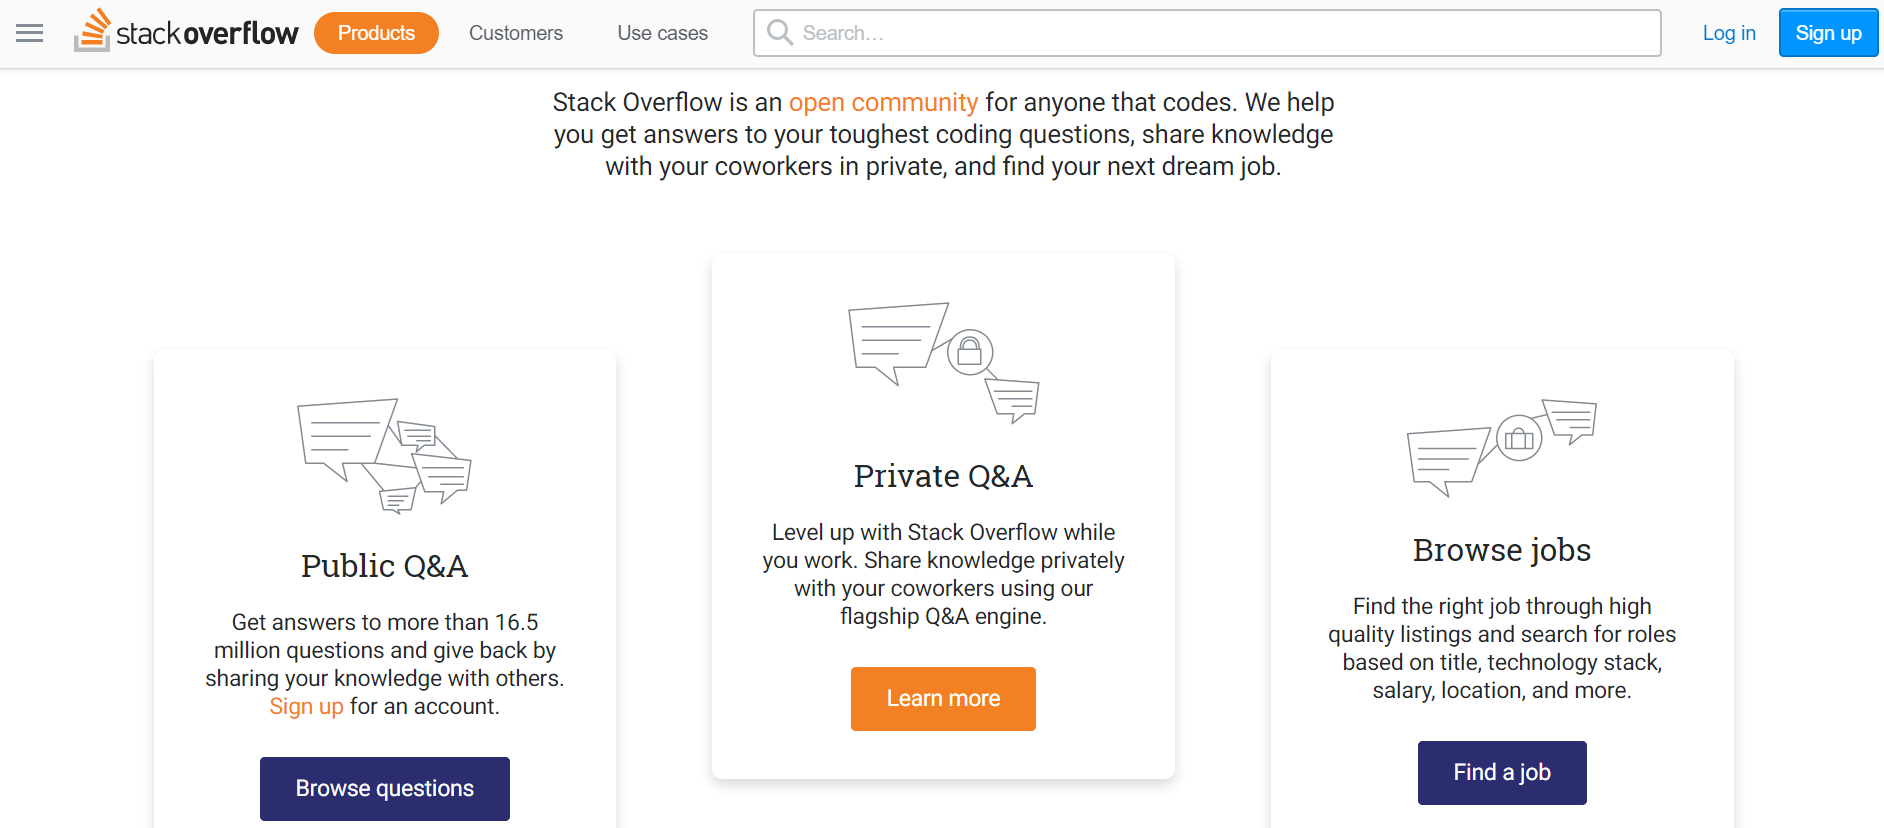 Stack Overflow - Social Media Recruiting